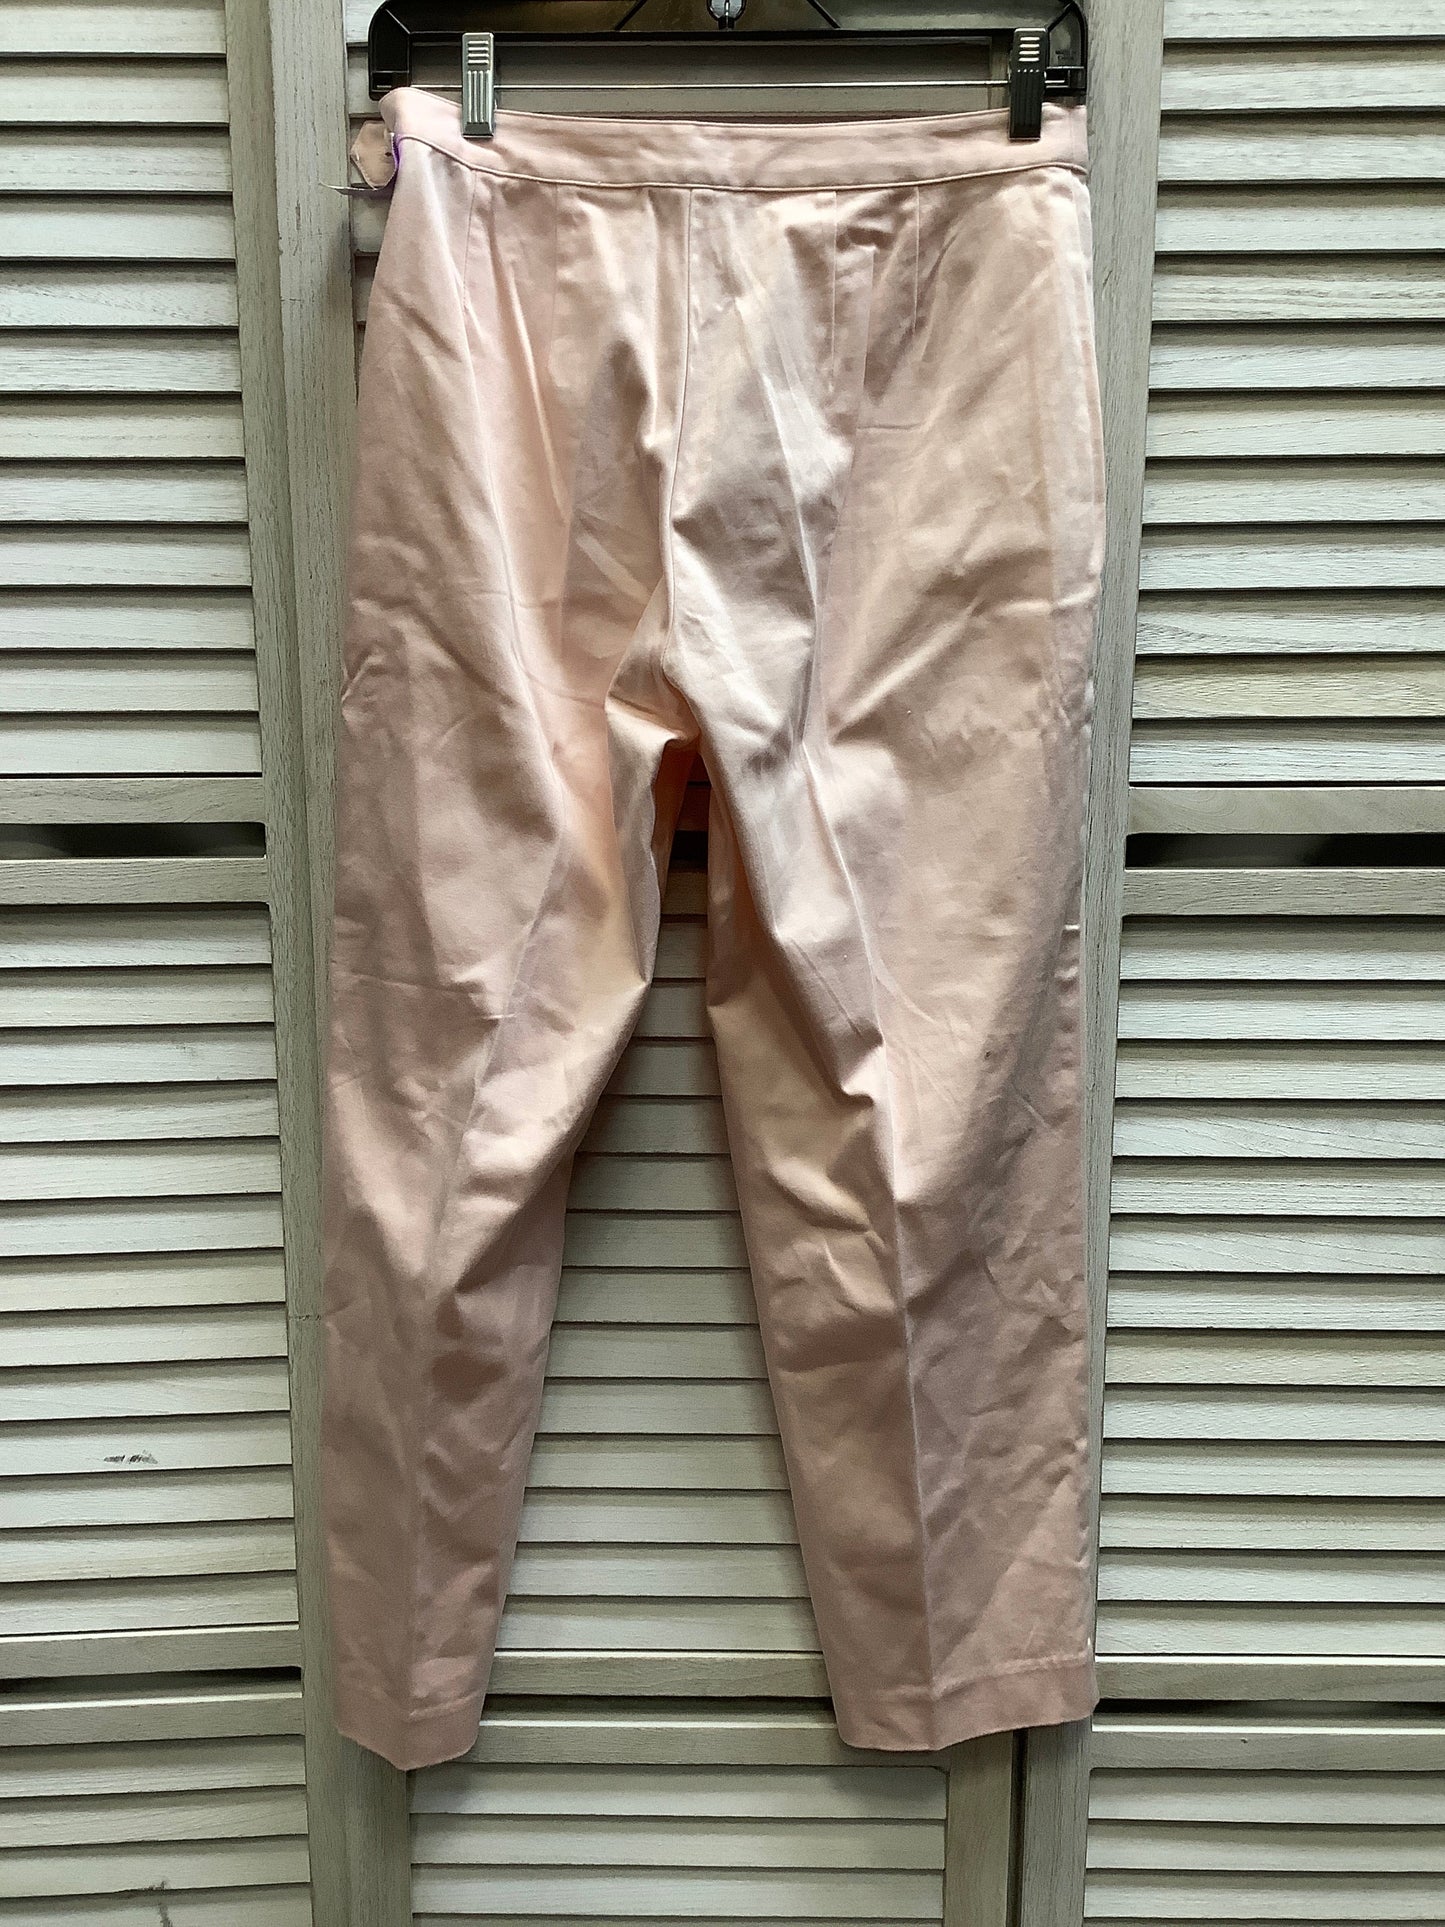 Pink Pants Cropped Laura Ashley, Size 8